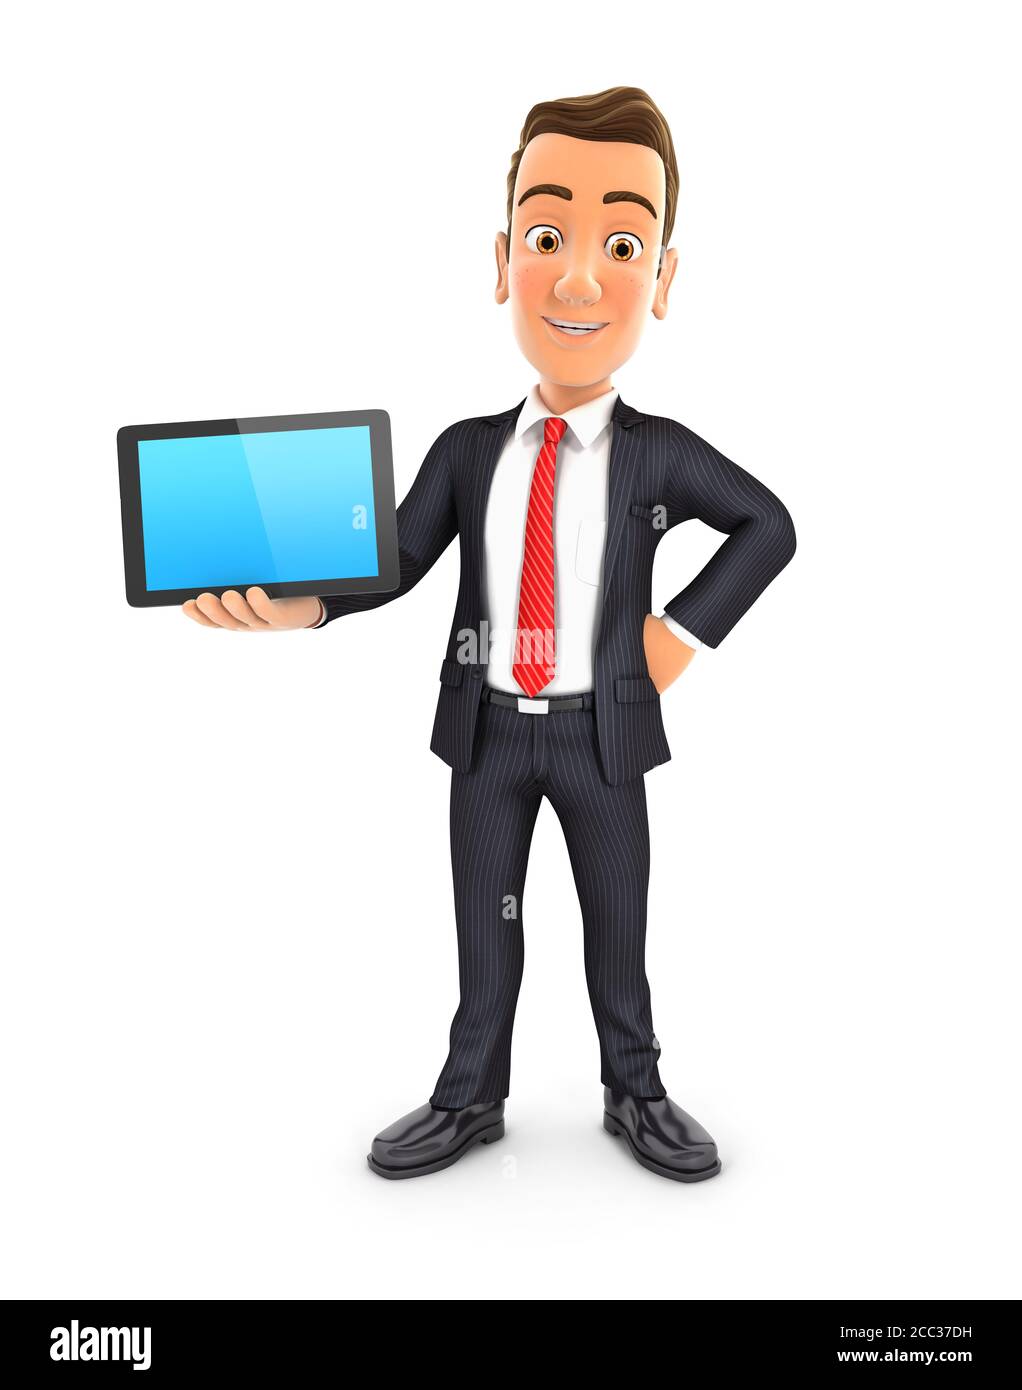 3d businessman standing with a tablet, illustration with isolated white background Stock Photo